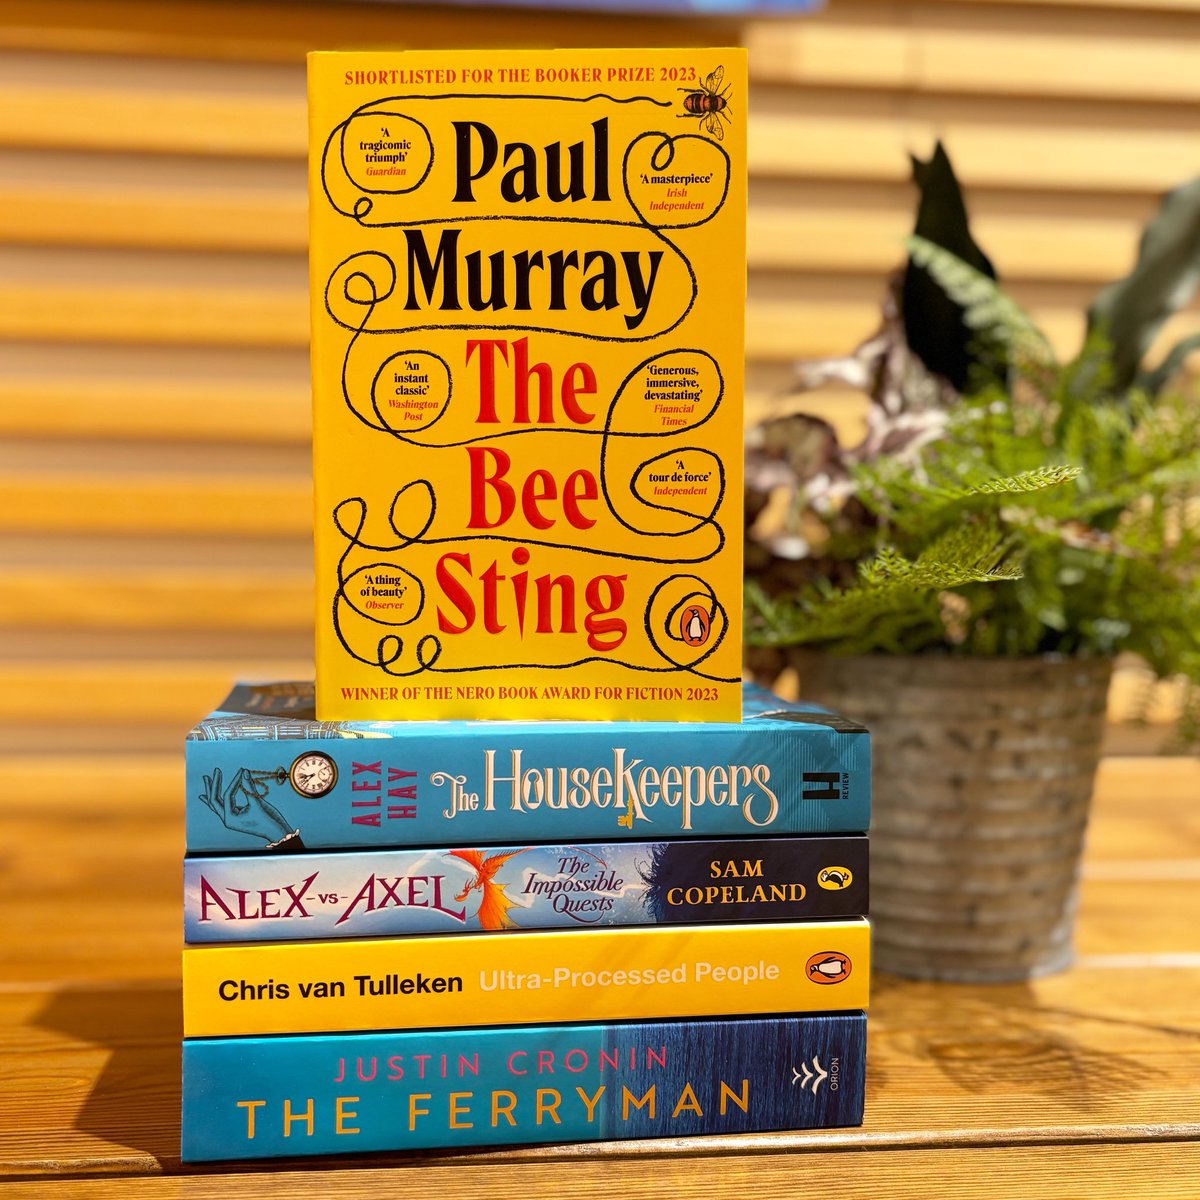 We are thrilled to announce our new Books of the Month for May! Don’t forget that you can pick up a complimentary drink in our cafe with purchase of any of the books during the month✨